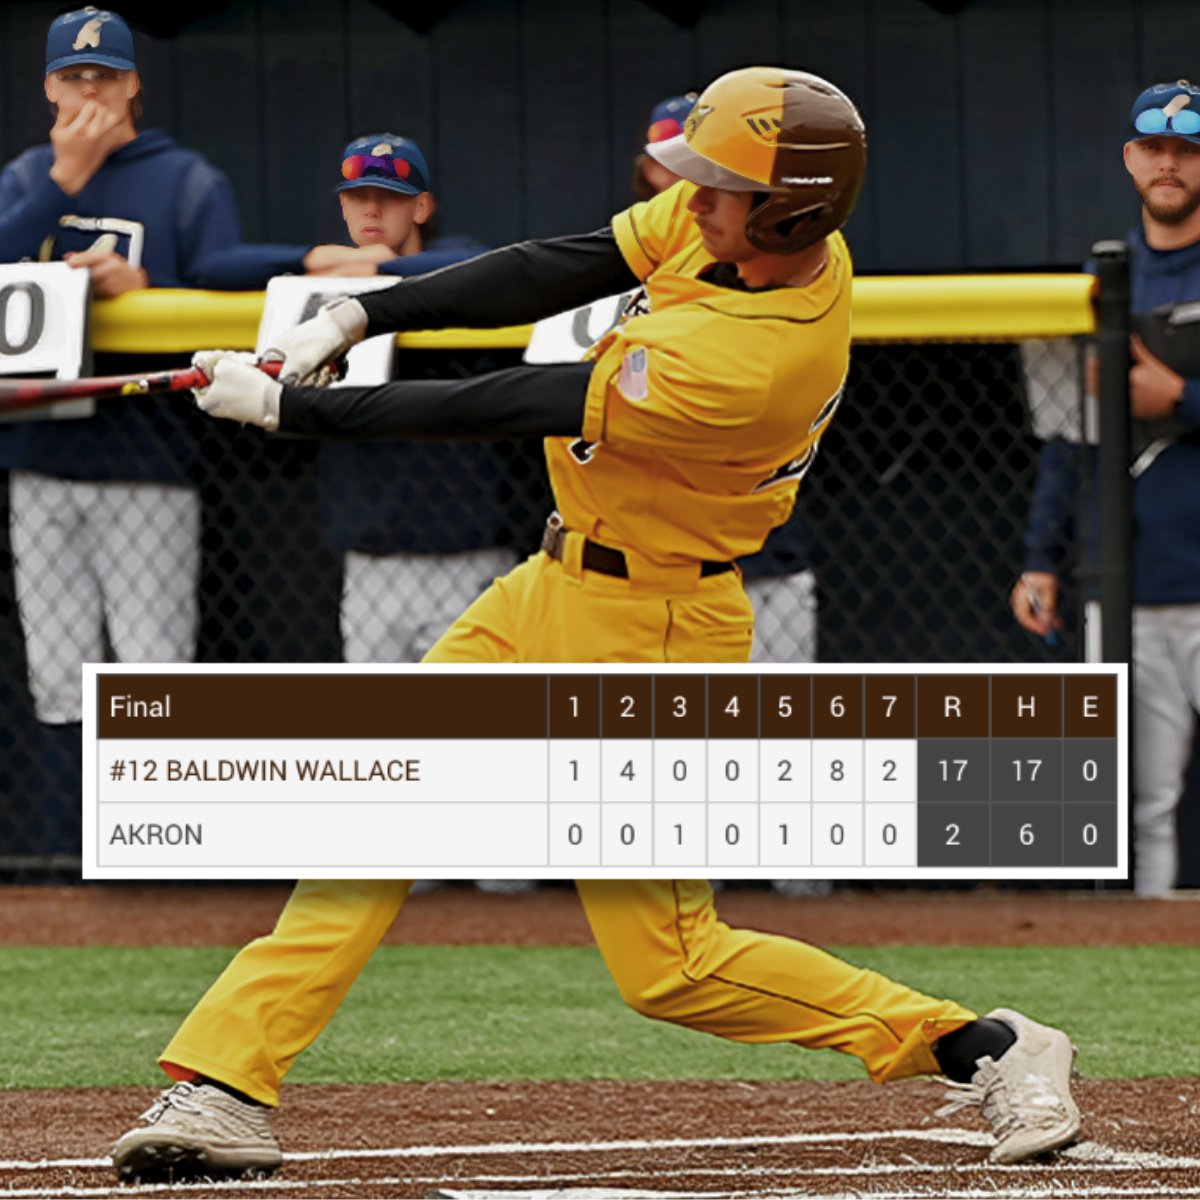 Two years really Zips by. OTD in 2022, @BWUBaseball went to Akron and showed that three's just a number.